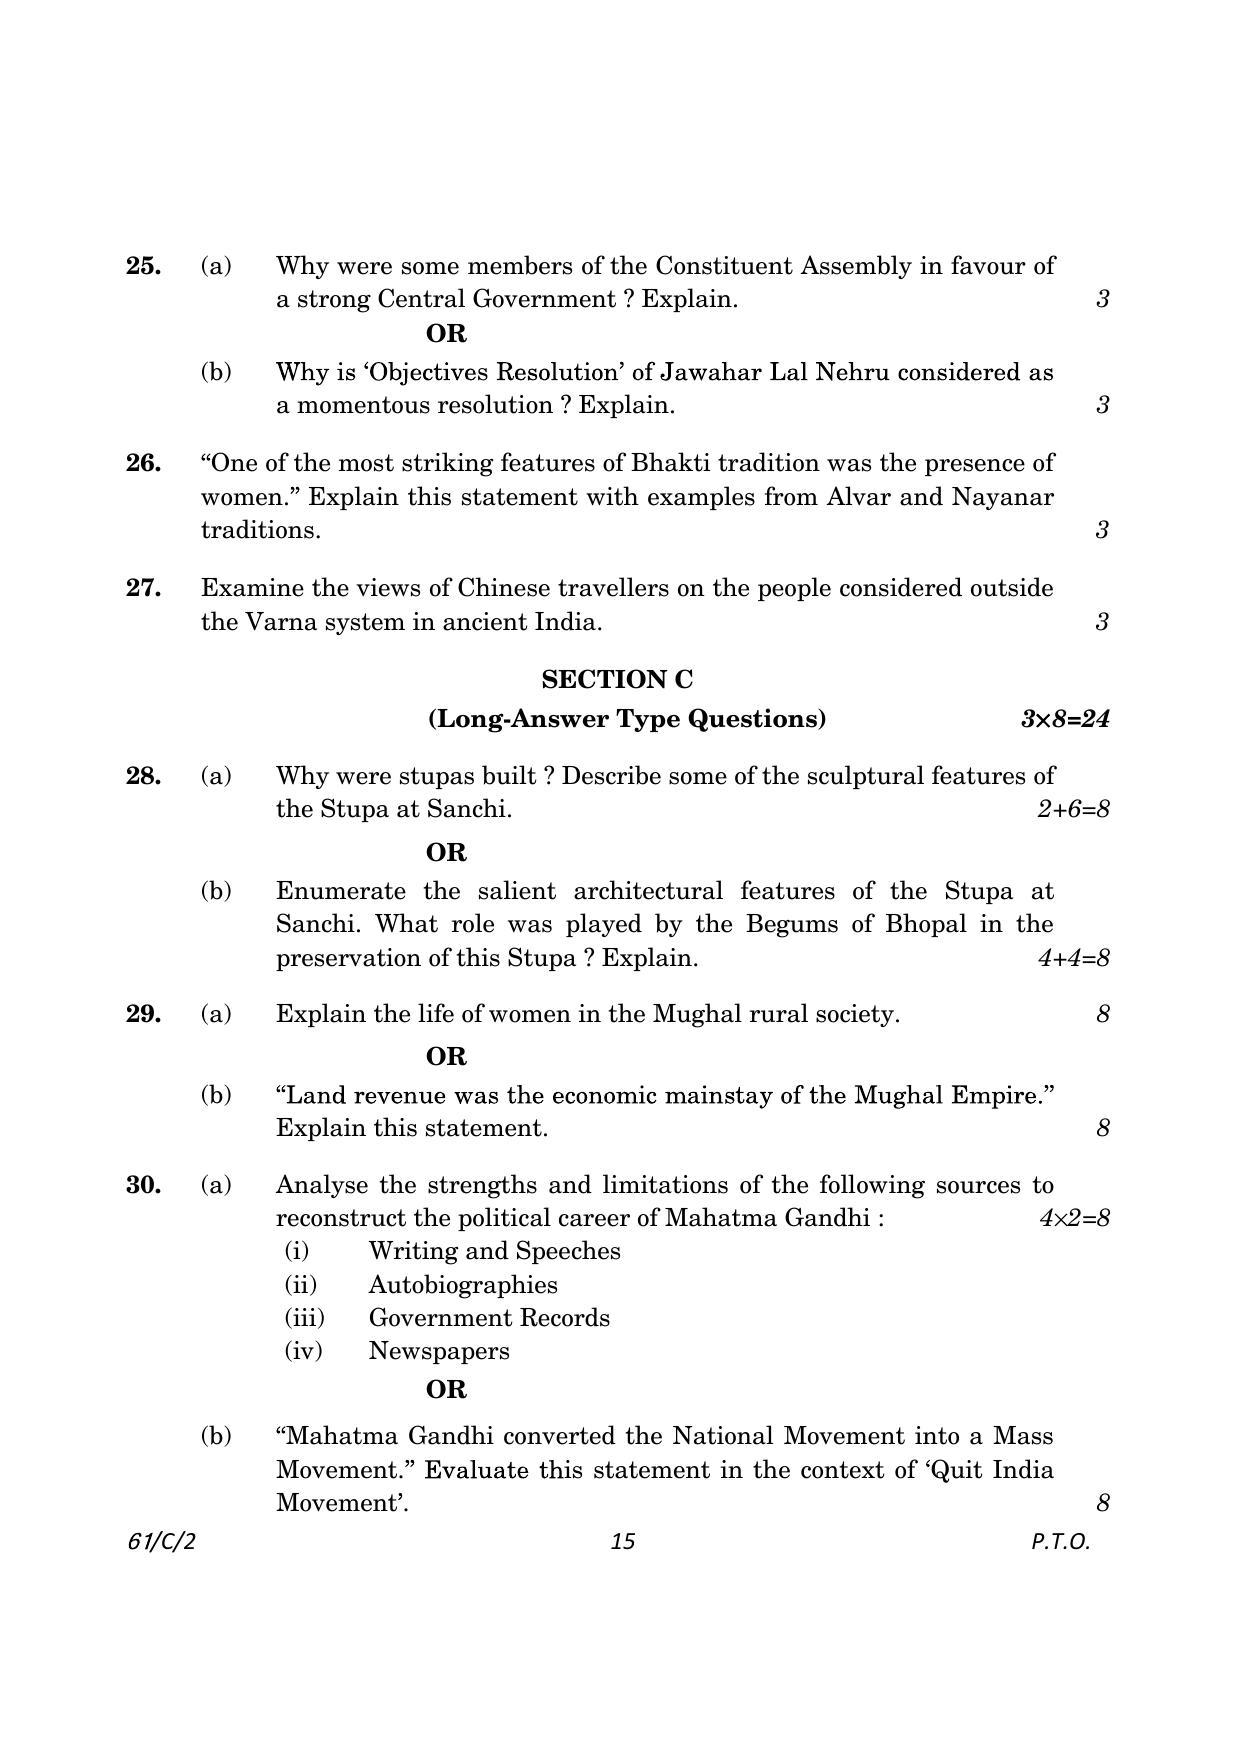 CBSE Class 12 61-2 History 2023 (Compartment) Question Paper - Page 15